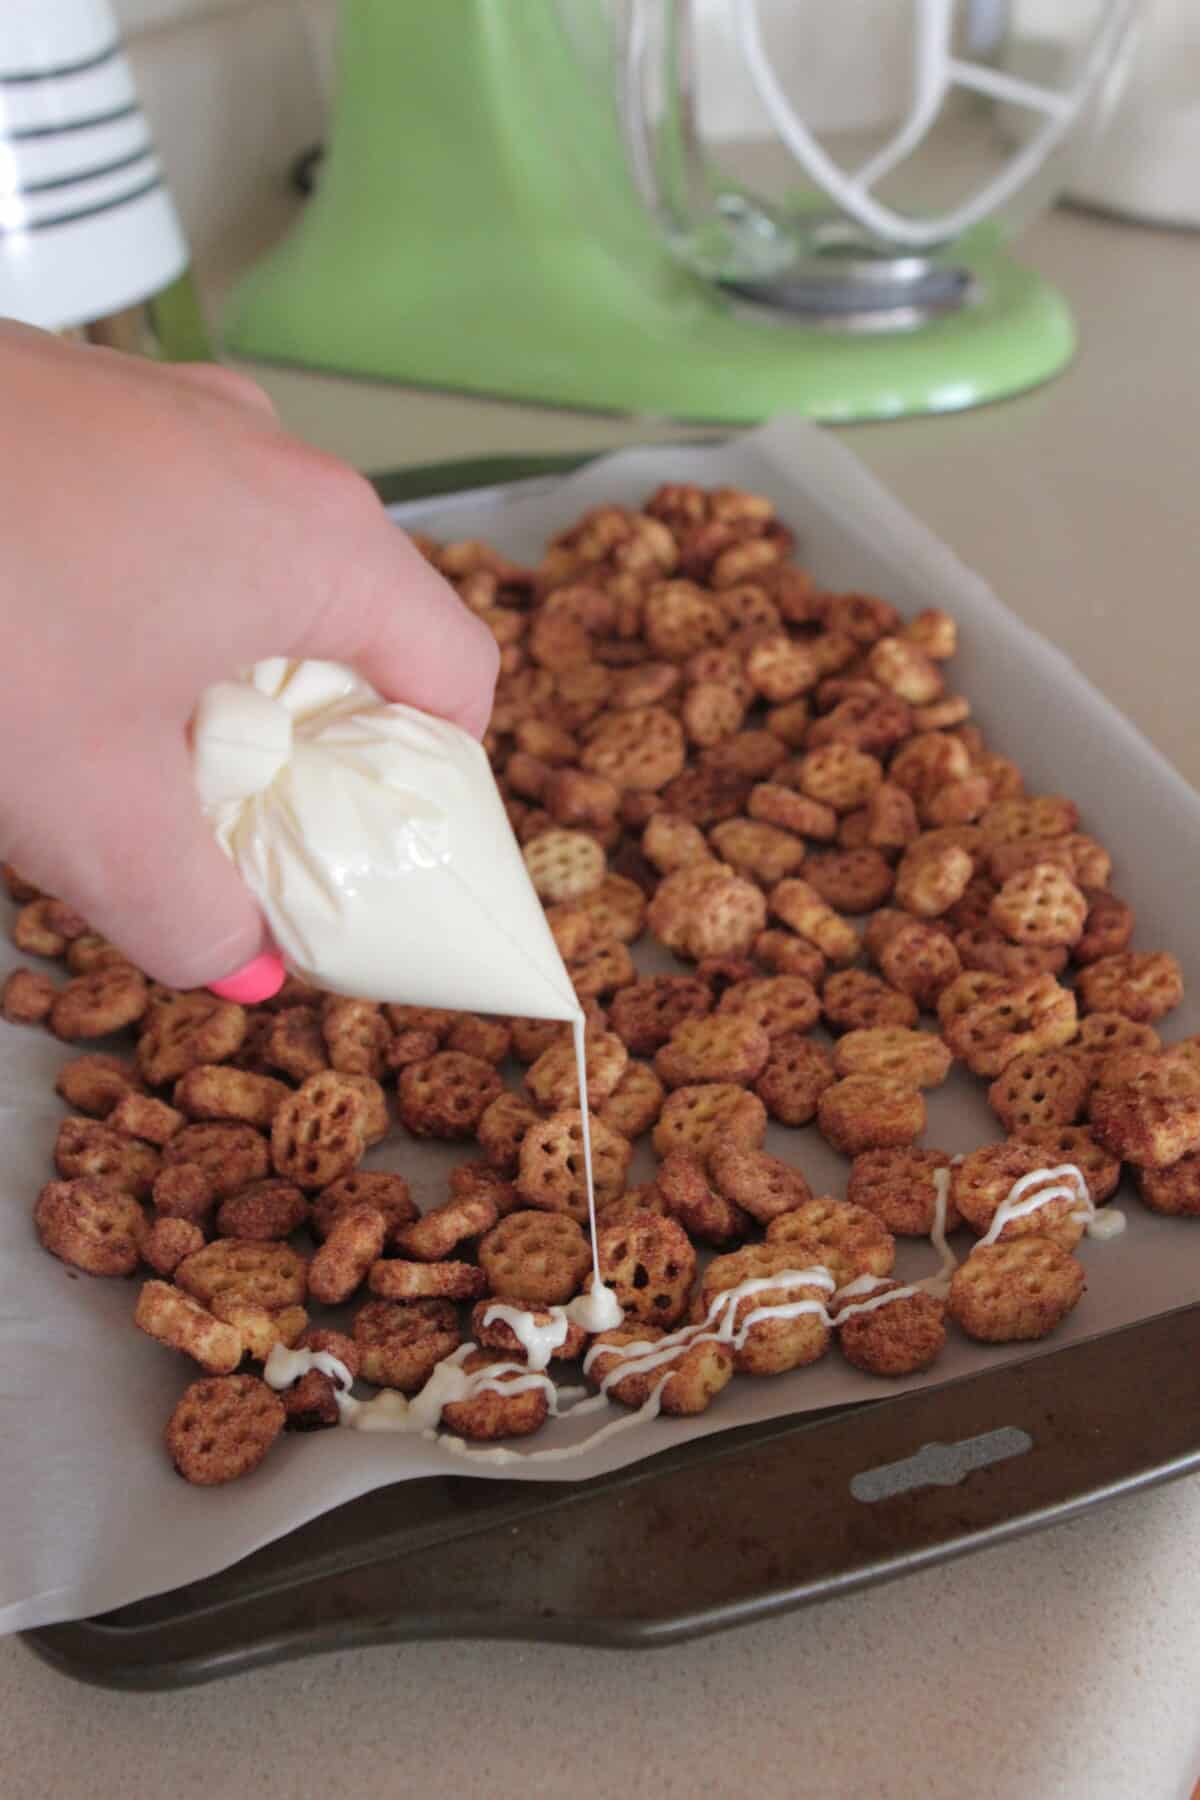 drizzling white chocolate over snack mix recipe